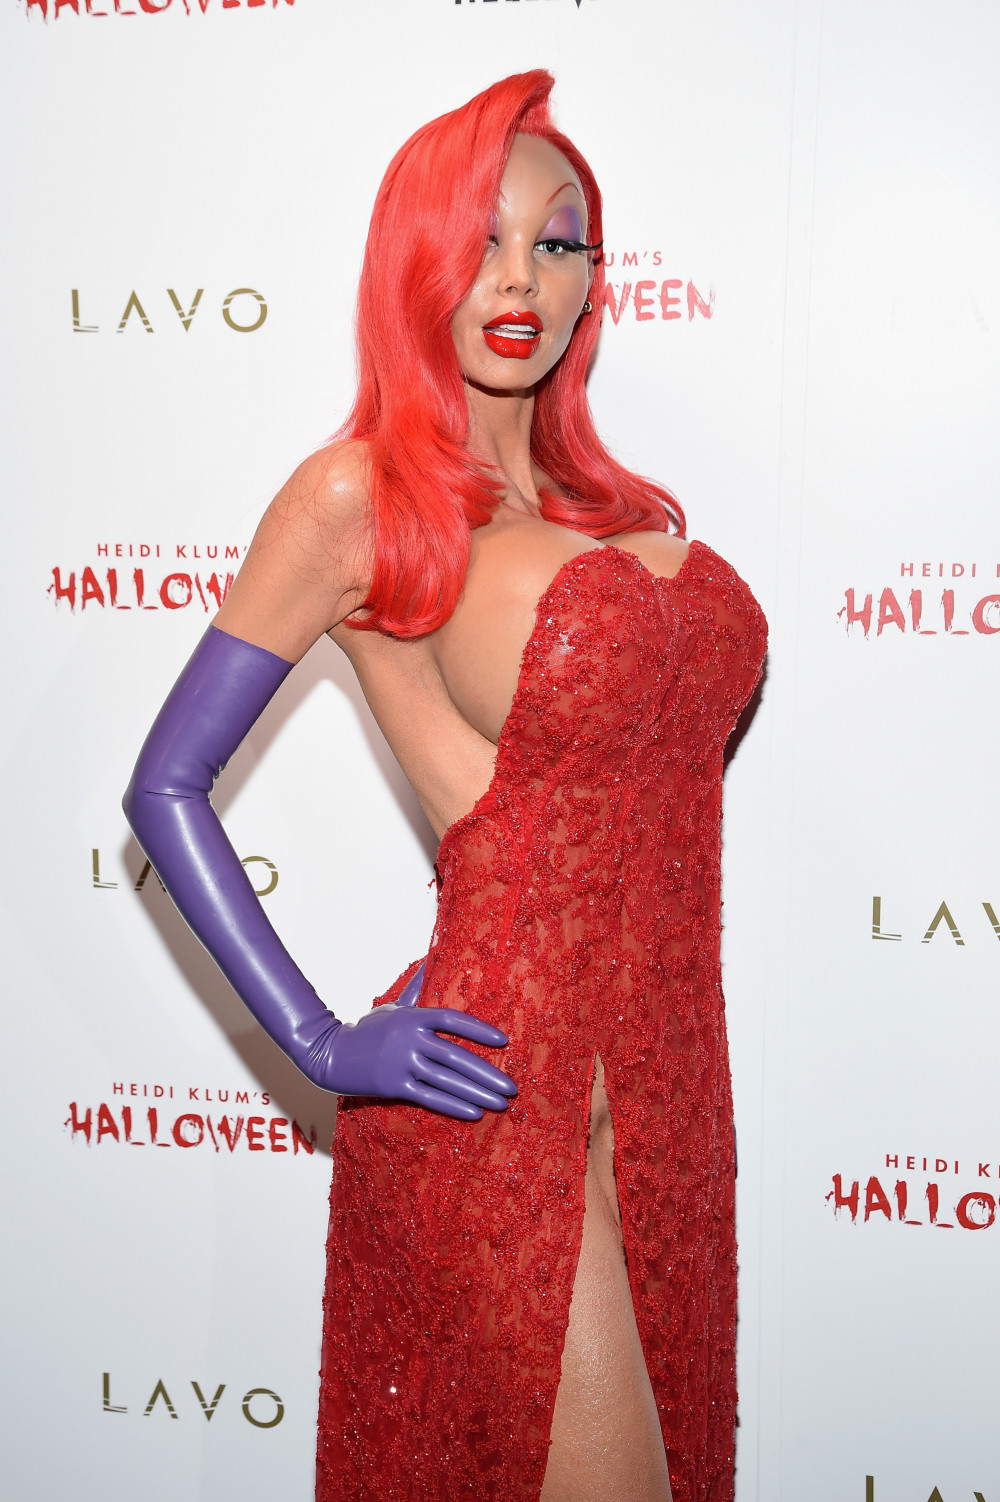 NEW YORK, NY - OCTOBER 31: Heidi Klum attends Heidi Klum's 16th Annual Halloween Party sponsored by GSN's Hellevator And SVEDKA Vodka At LAVO New York on October 31, 2015 in New York City. (Photo by Nicholas Hunt/Getty Images for Heidi Klum)